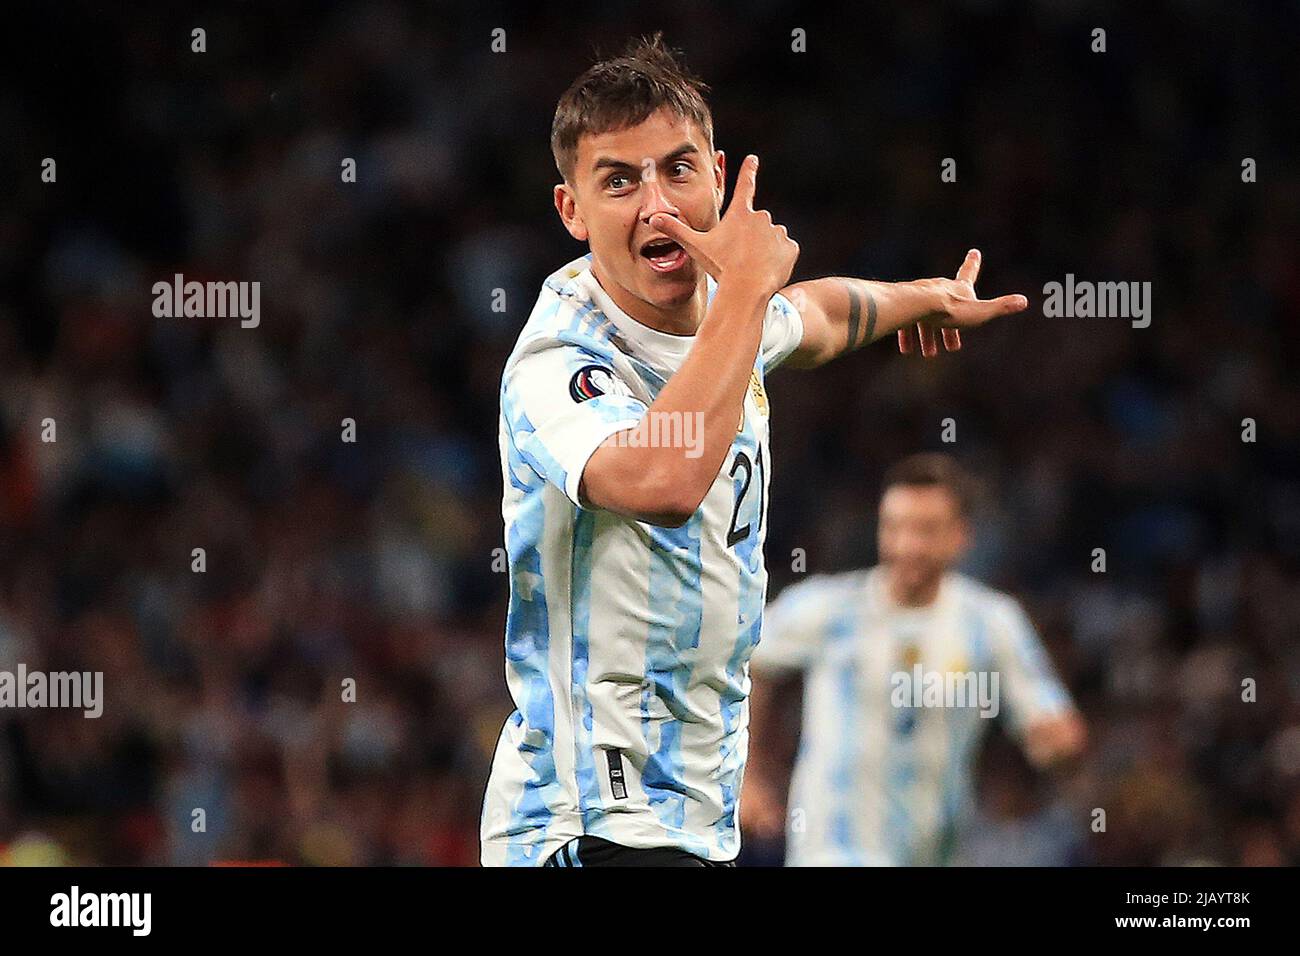 London, UK. 01st June, 2022. Paulo Dybala of Argentina celebrates after scoring his teams 3rd goal. Finalissima 2022 match, Italy v Argentina at Wembley Stadium in London on Wednesday 1st June 2022. Editorial use only. pic by Steffan Bowen/Andrew Orchard sports photography/Alamy Live news Credit: Andrew Orchard sports photography/Alamy Live News Stock Photo